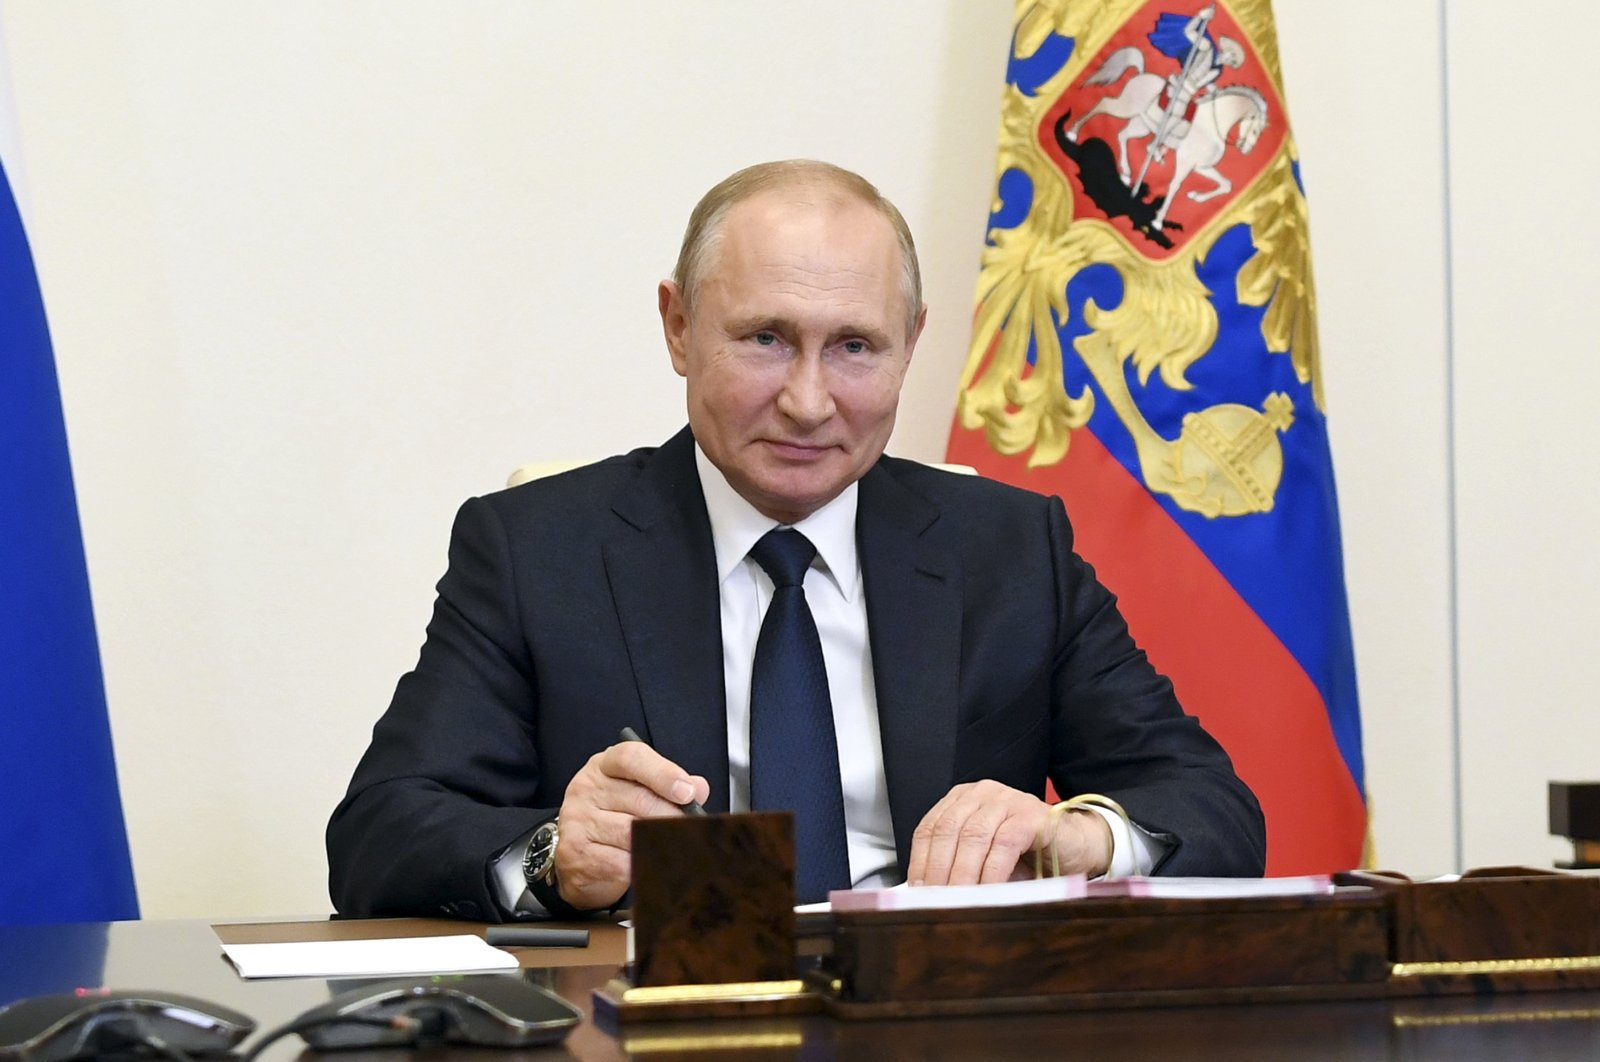 Russian President Vladimir Putin attends a meeting via teleconference at the Novo-Ogaryovo residence outside Moscow, Russia, June 1, 2020. (Kremlin Pool Photo via AP)